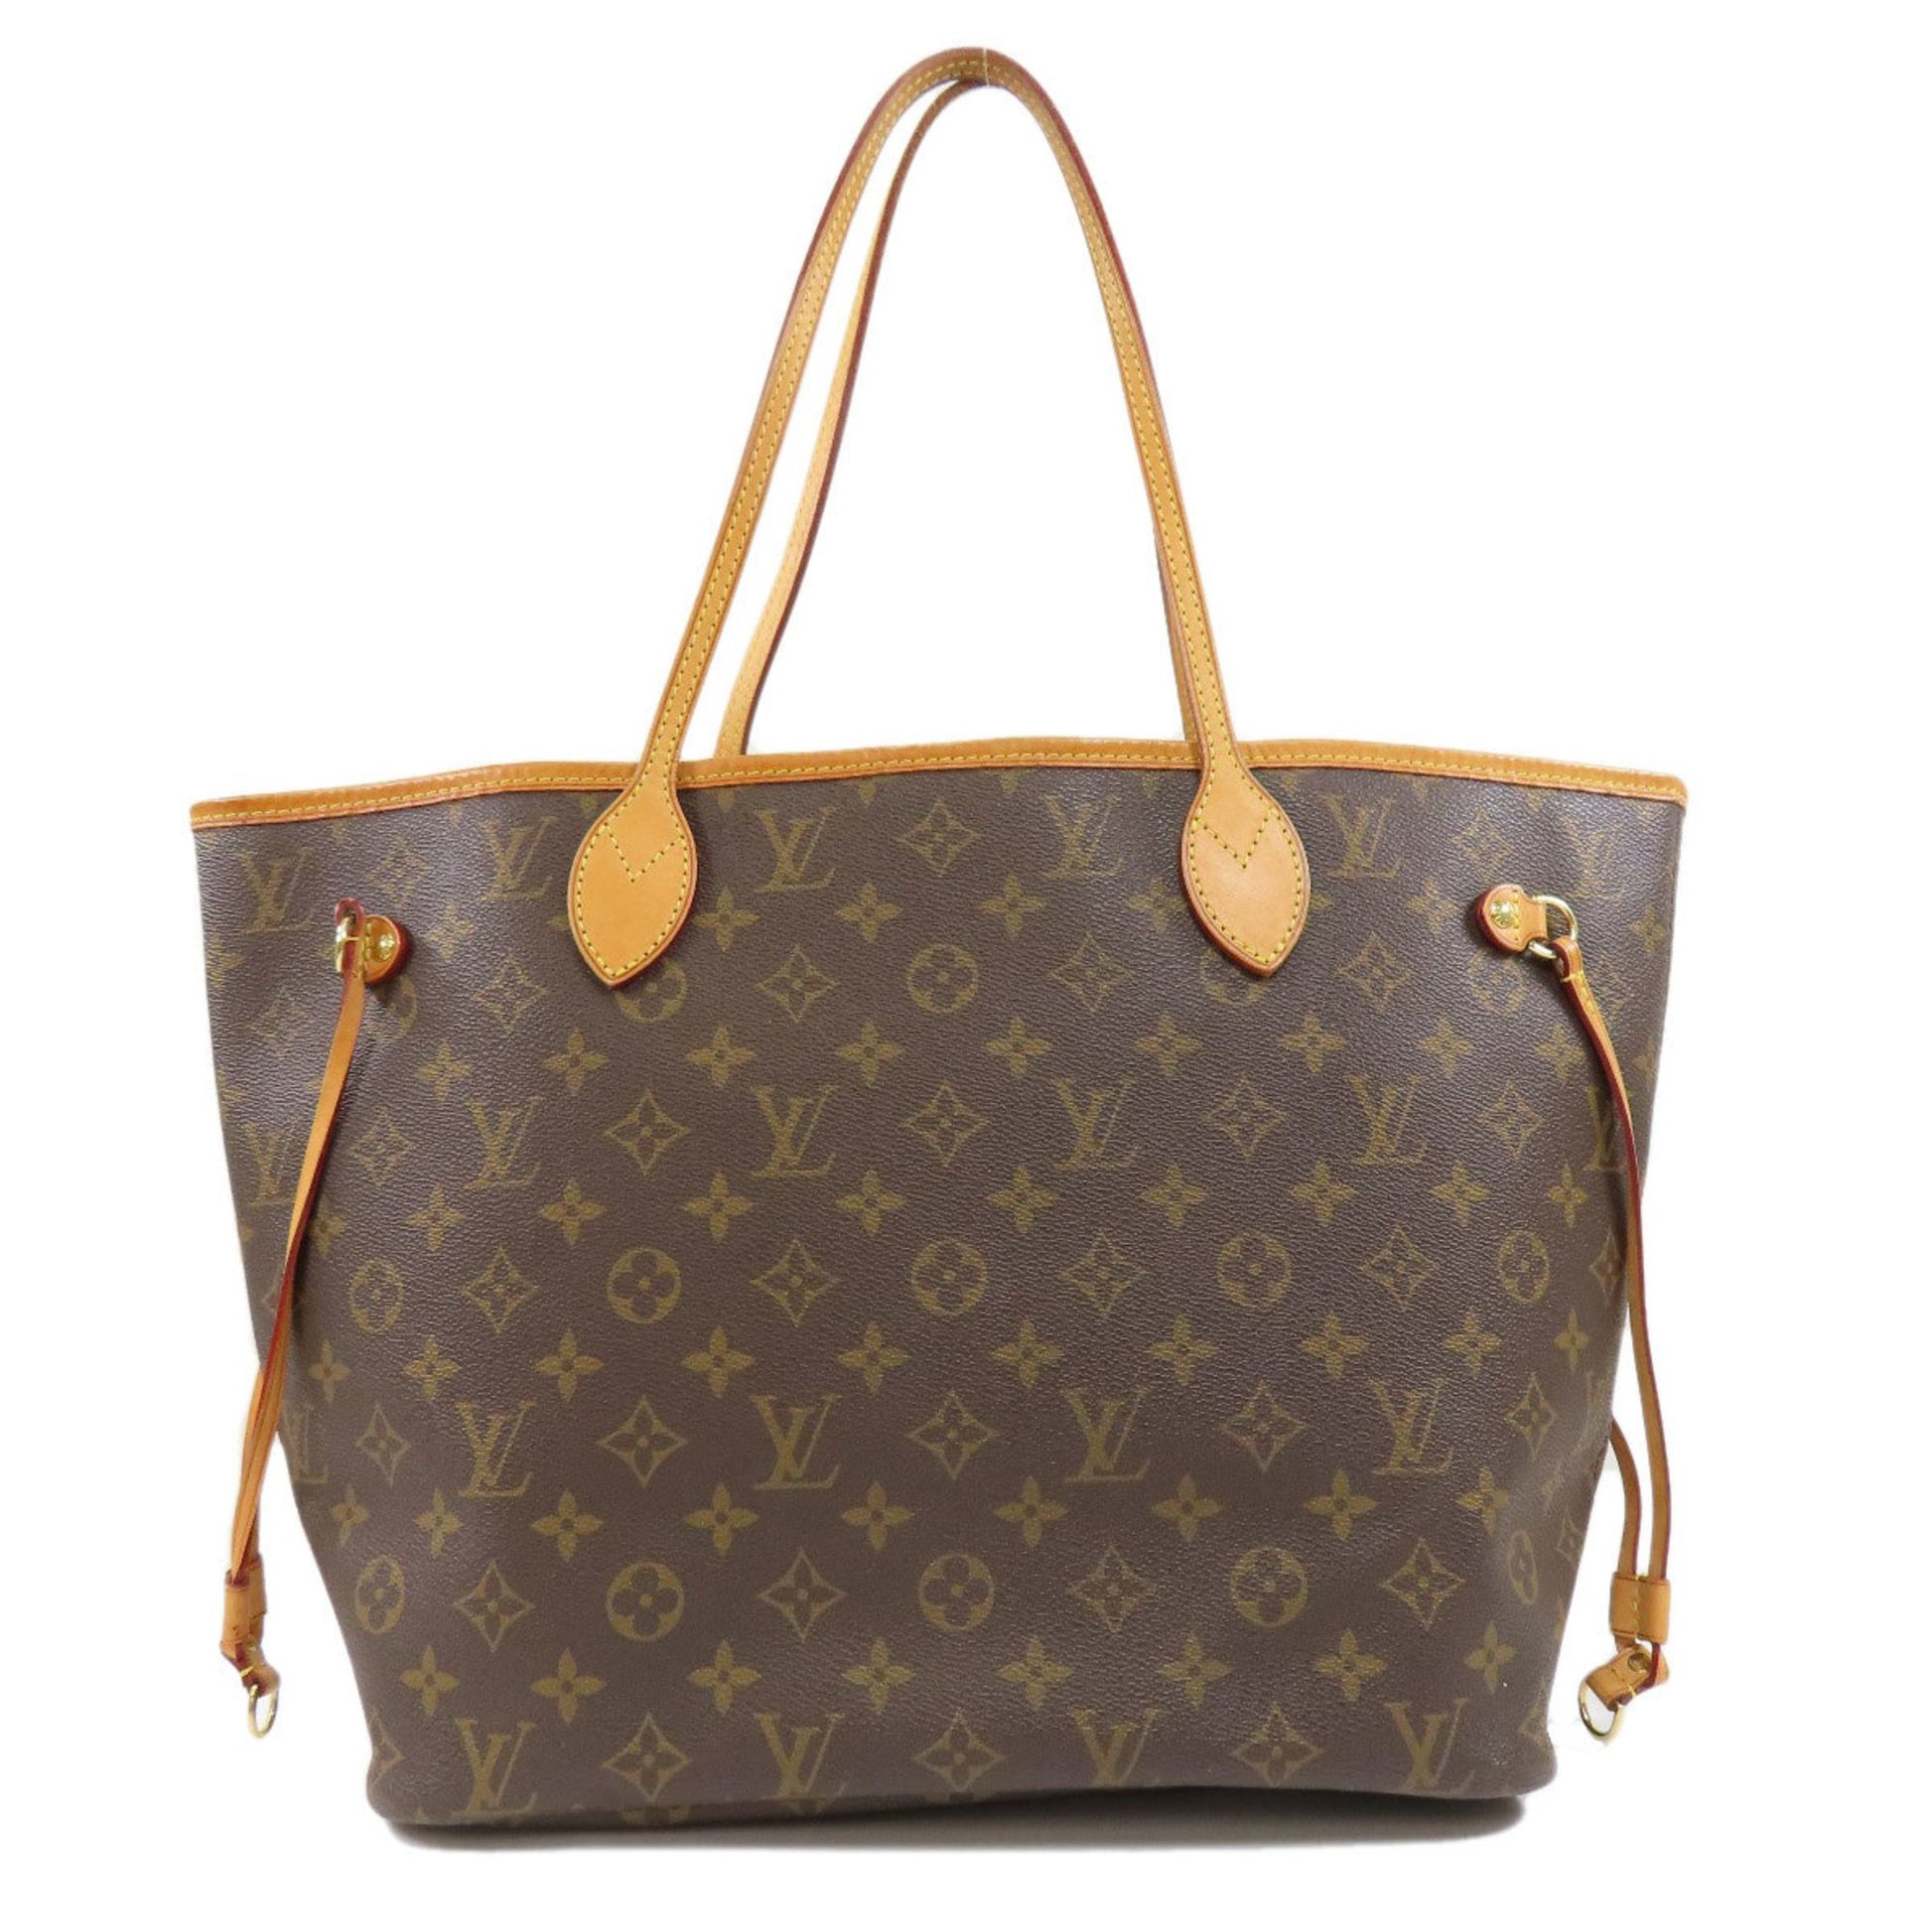 LOUIS VUITTON Tote Bag M40156 Neverfull MM Monogram canvas Brown Women Used